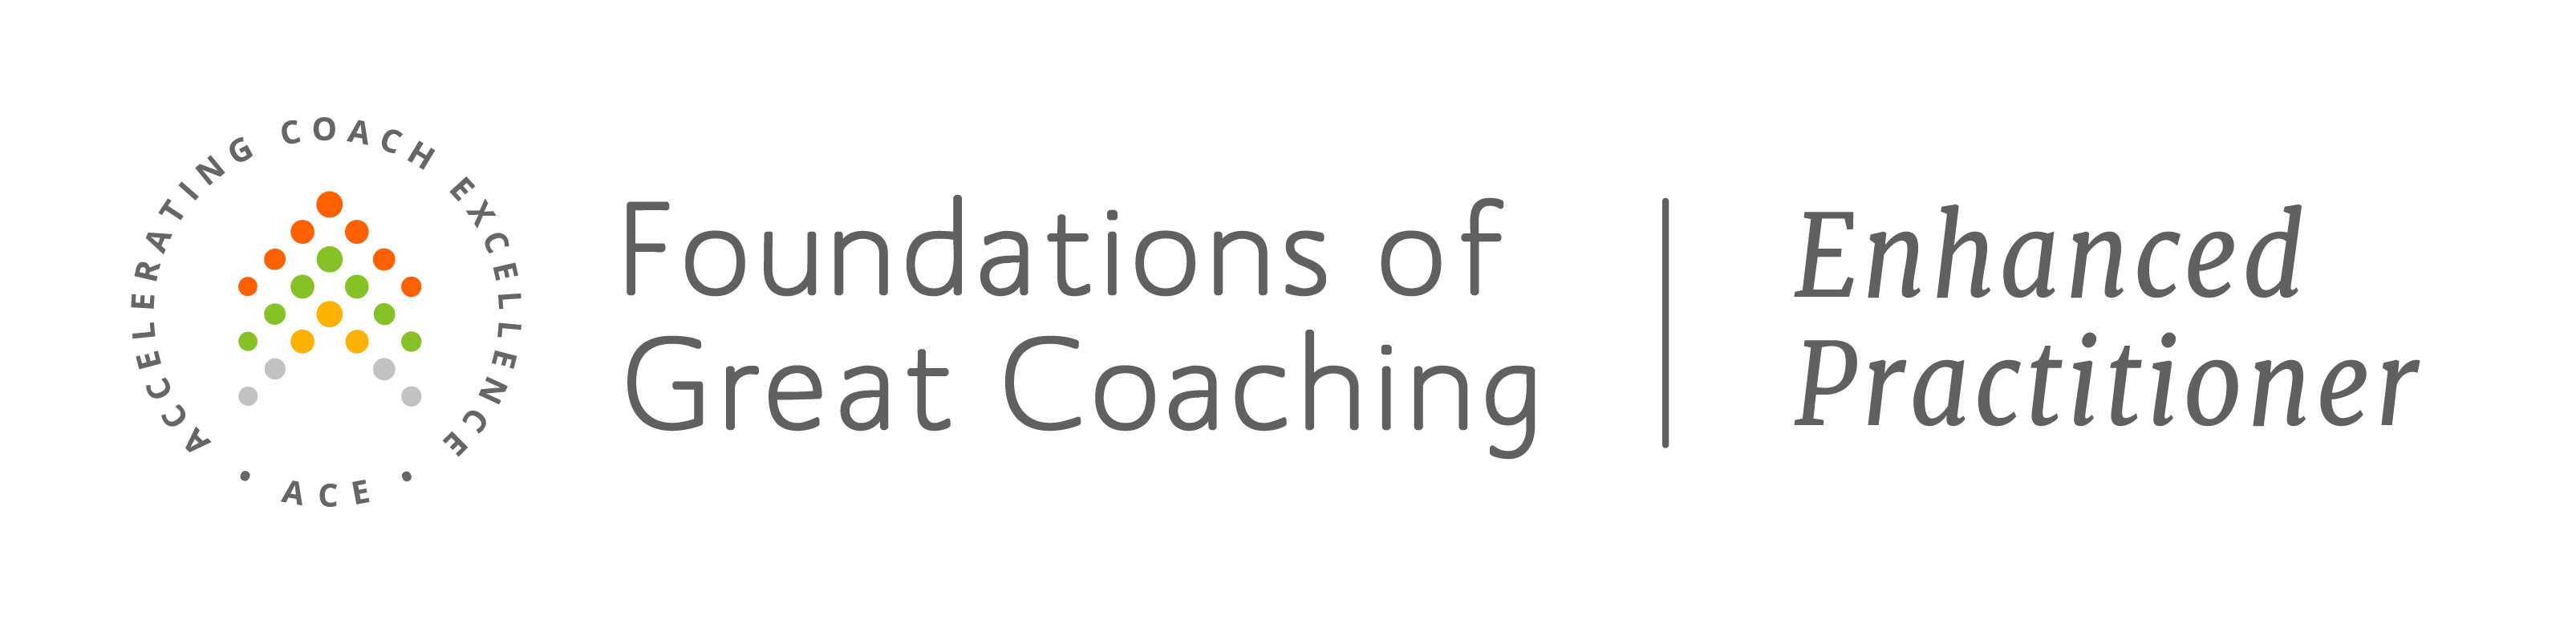 Foundations of Great Coaching Enhanced Practitioner